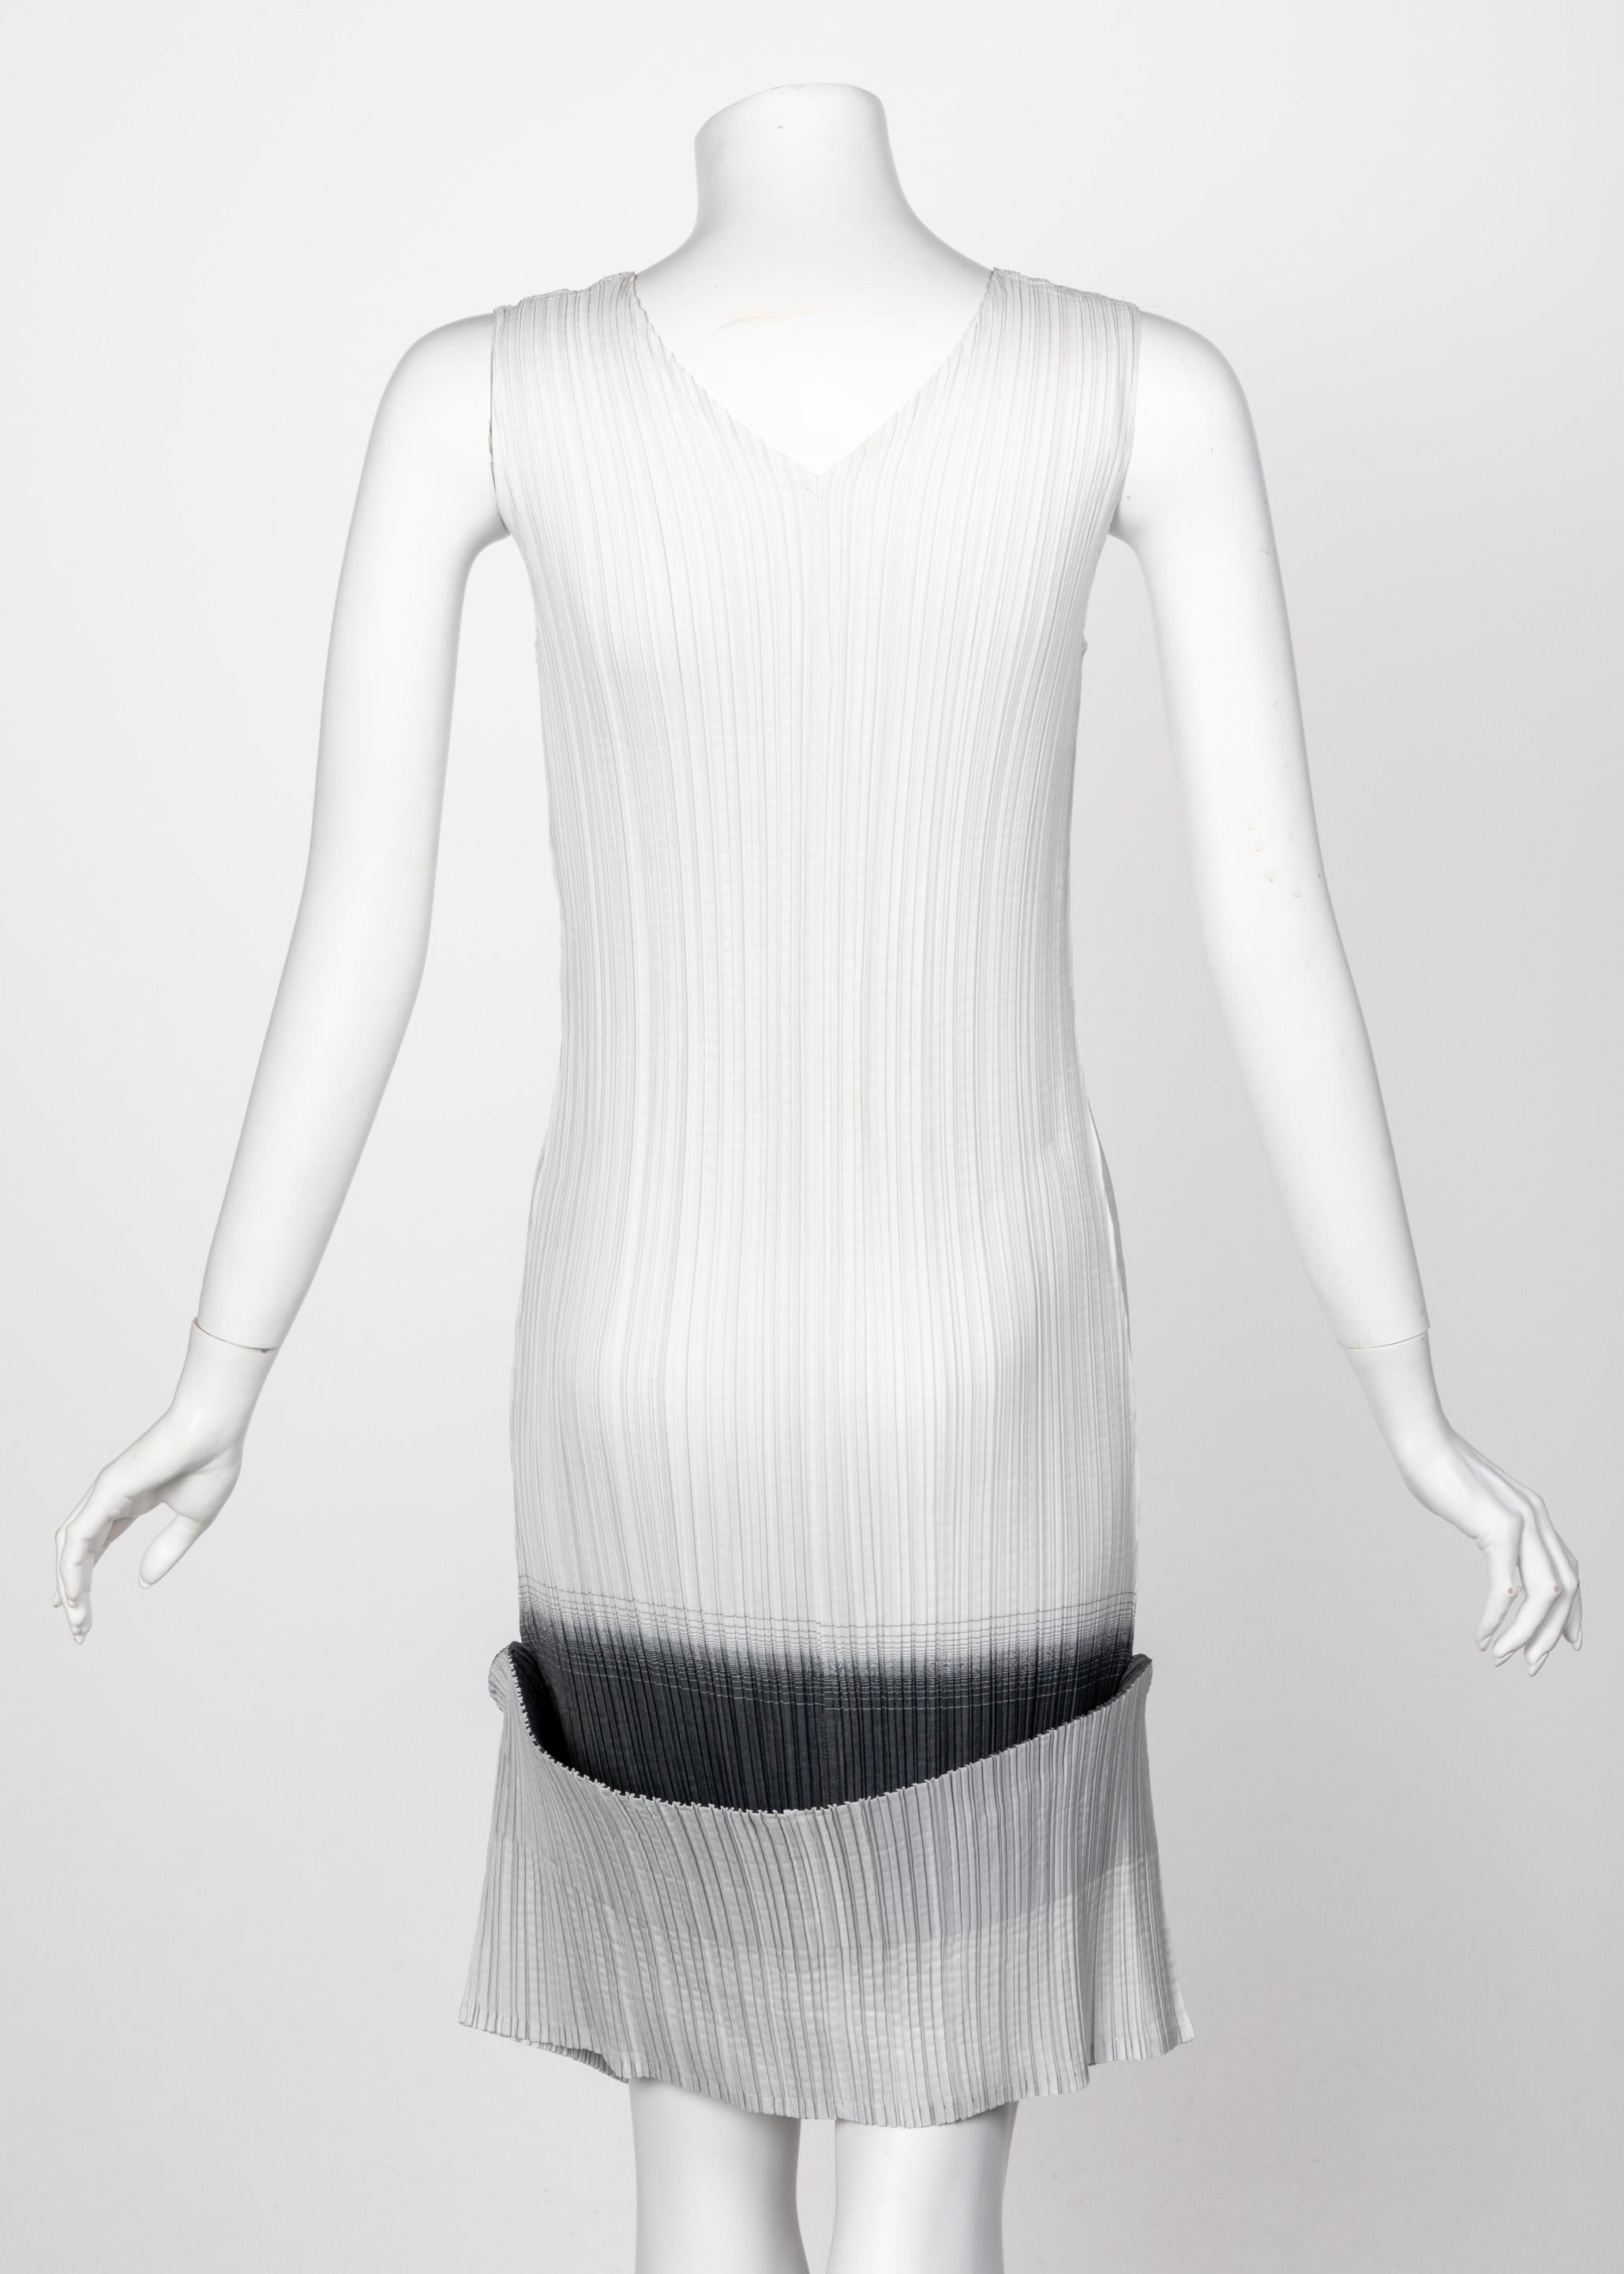 Issey Miyake “A Piece of Cloth” 2-Way White Gray Sleeveless Sculptural Dress For Sale 1